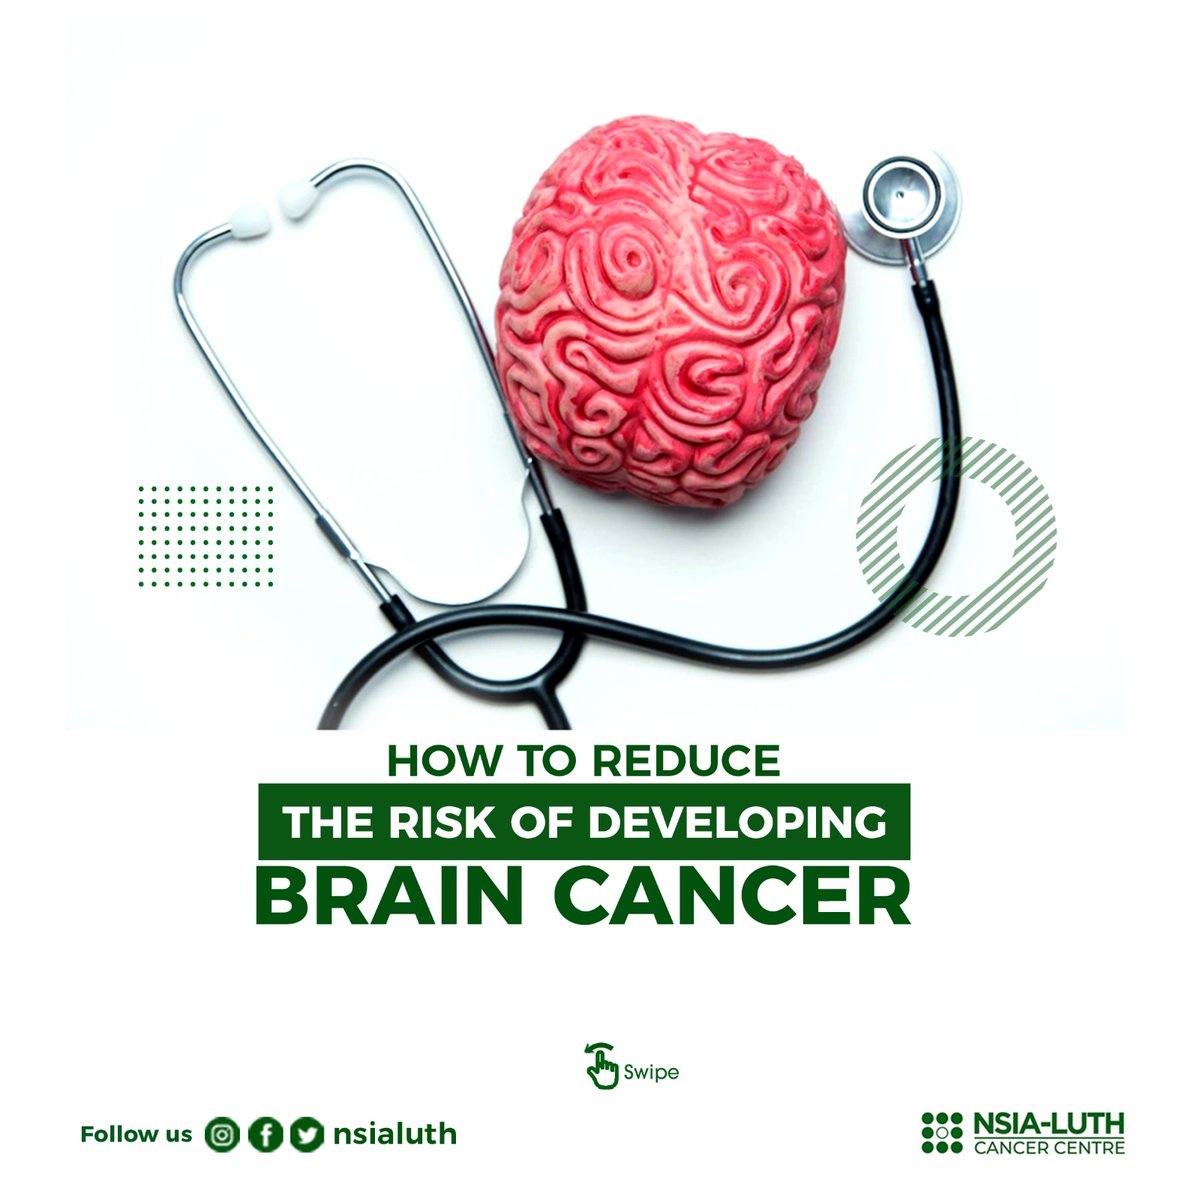 Brain cancer is a type of cancer that starts in the brain. It can be caused by a variety of factors, including genetics, exposure to radiation, and certain viruses. 
#BrainCancerAwareness #InspireHope #braincancer #braintumour #cancerawareness #cancers #CancerCentre #NSIA #LUTH